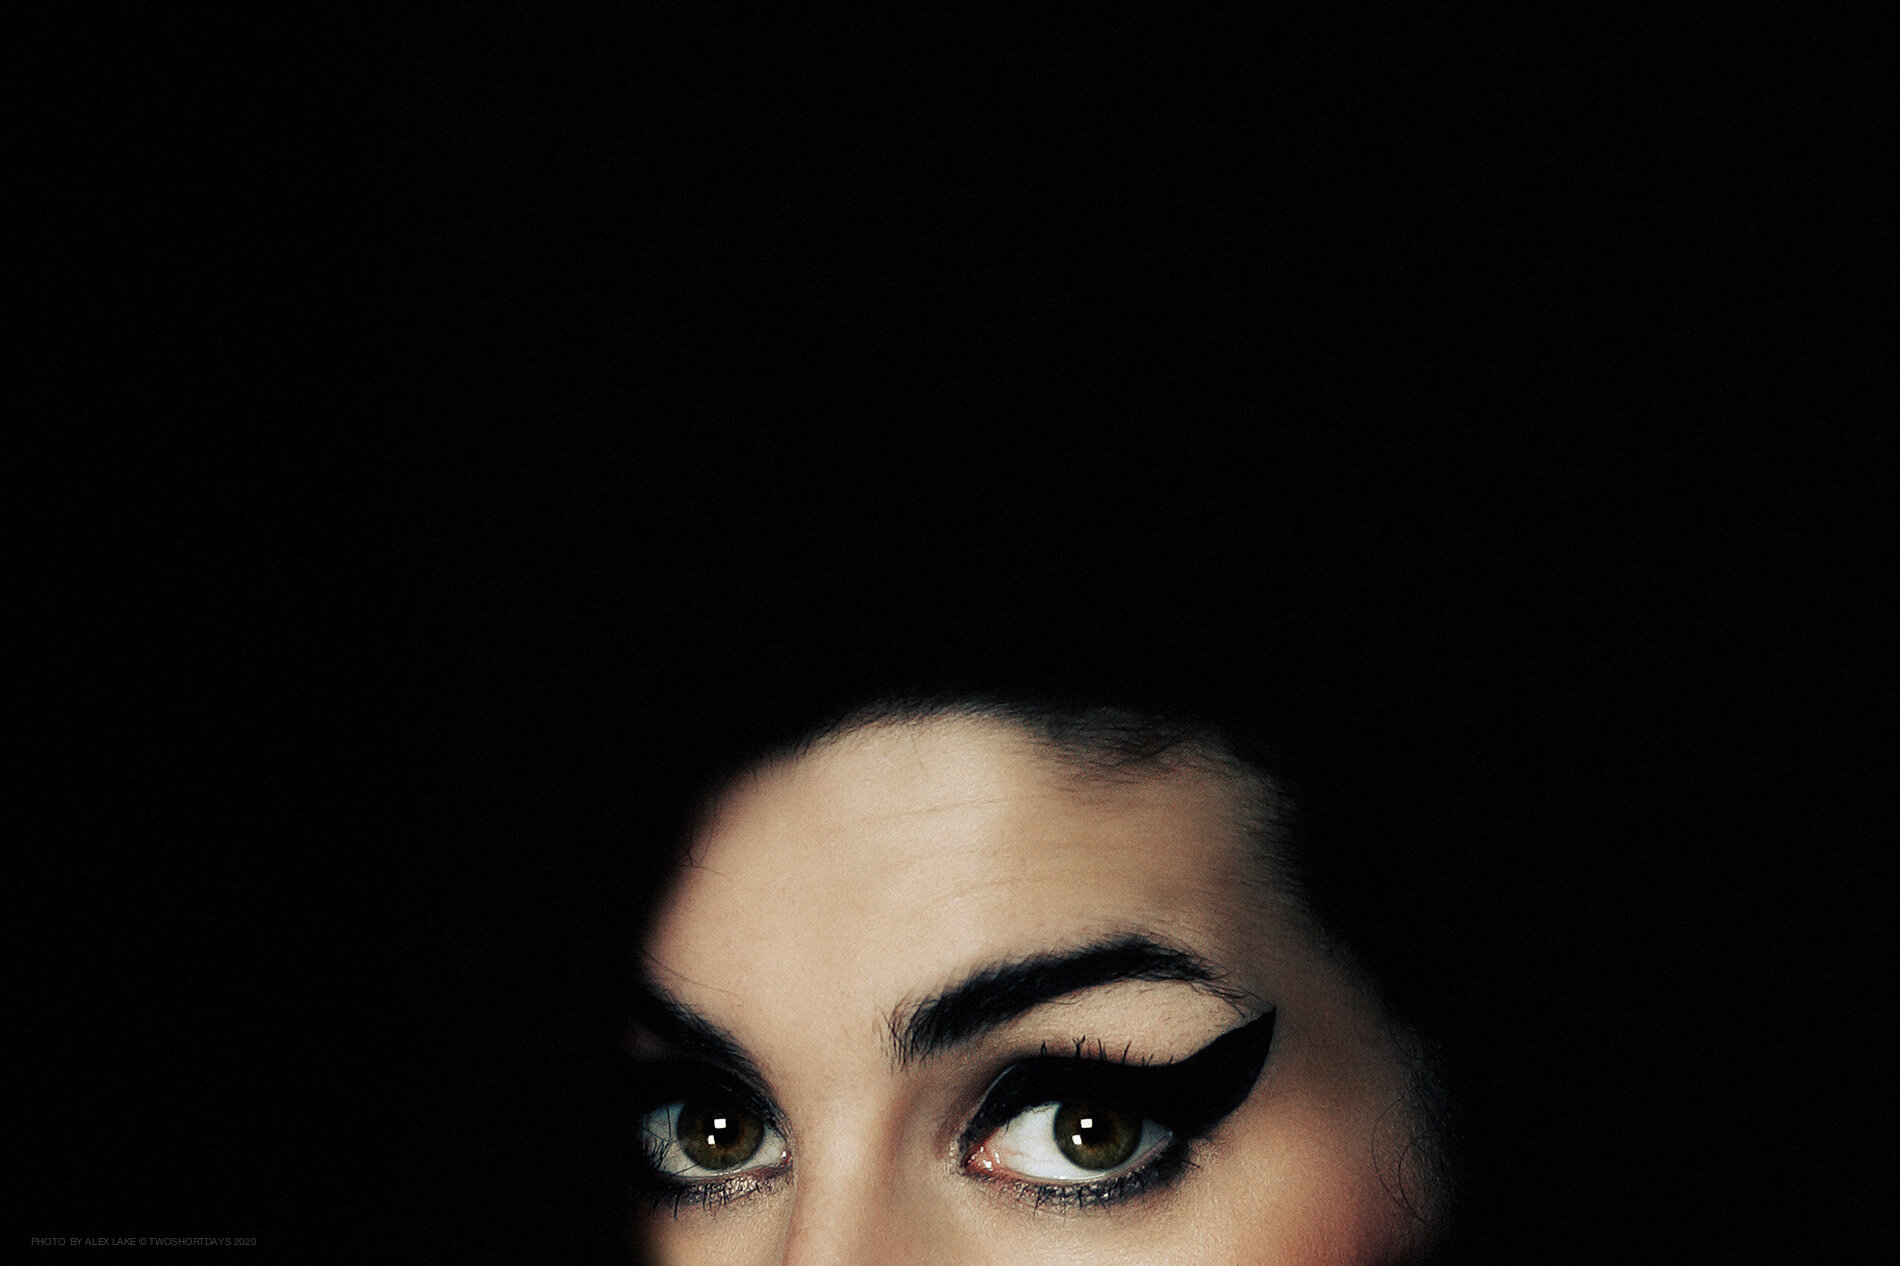 amy_winehouse_photography_copyright_ALEX_LAKE_do_not_reproduce_without_permission_TWOSHORTDAYS.jpg